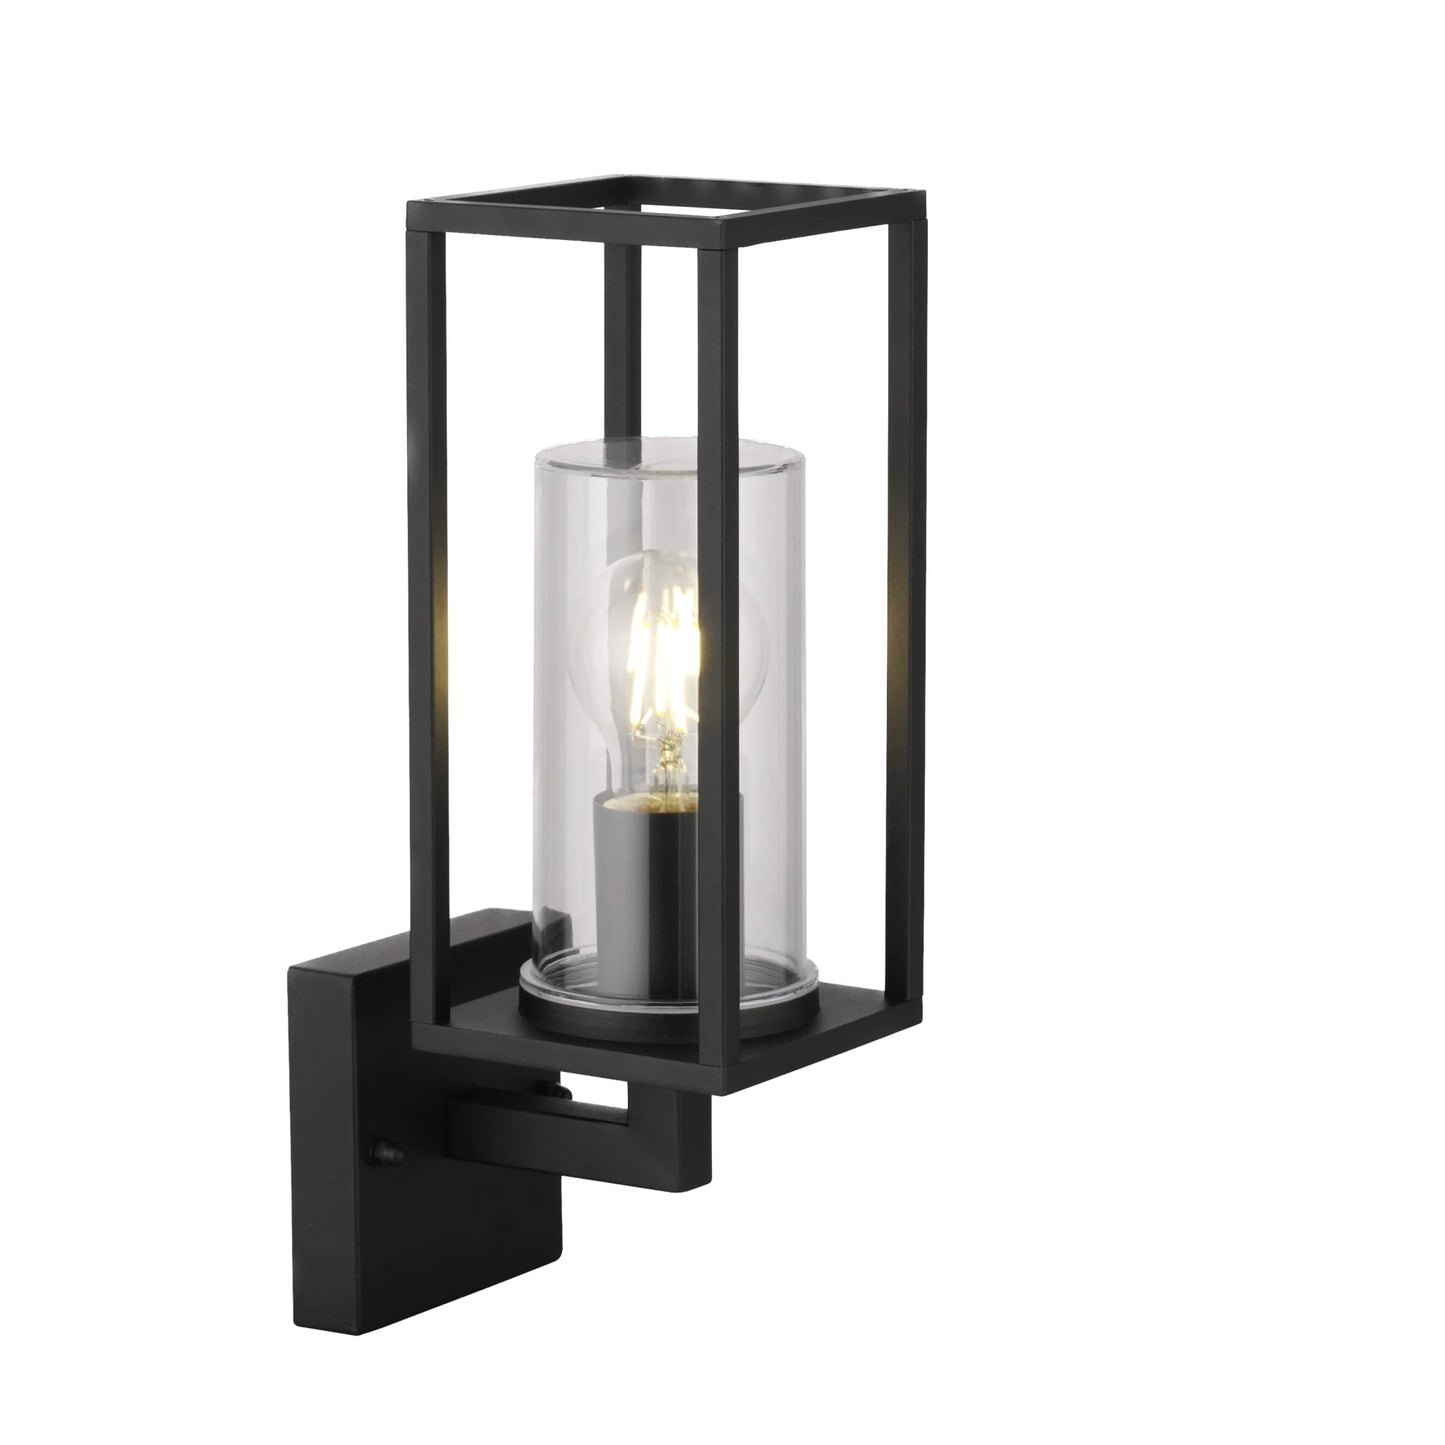 Wall lantern with clear glass and black finish. The elegant appearance of the lamp makes it ideal for modern outdoor spaces. You can install it with a decorative light bulb to give a more traditional look to a contemporary design.